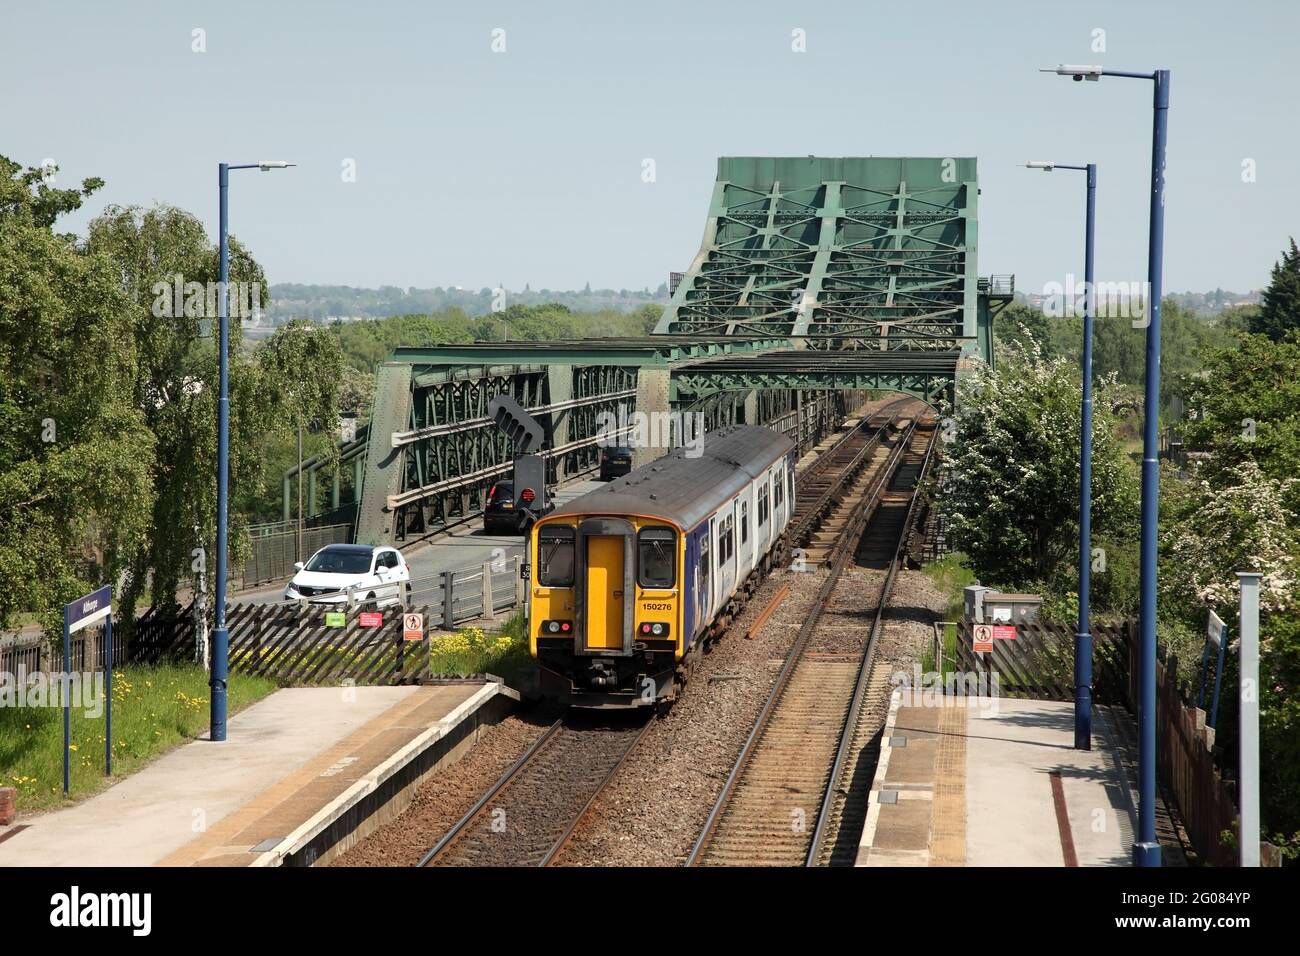 Northern Trains Class 150 Sprinter 150276 with the 2P15 1342 Doncaster to Scunthorpe service at Althorpe, Lincs heading for Keadby Bridge on 1/6/21. Stock Photo